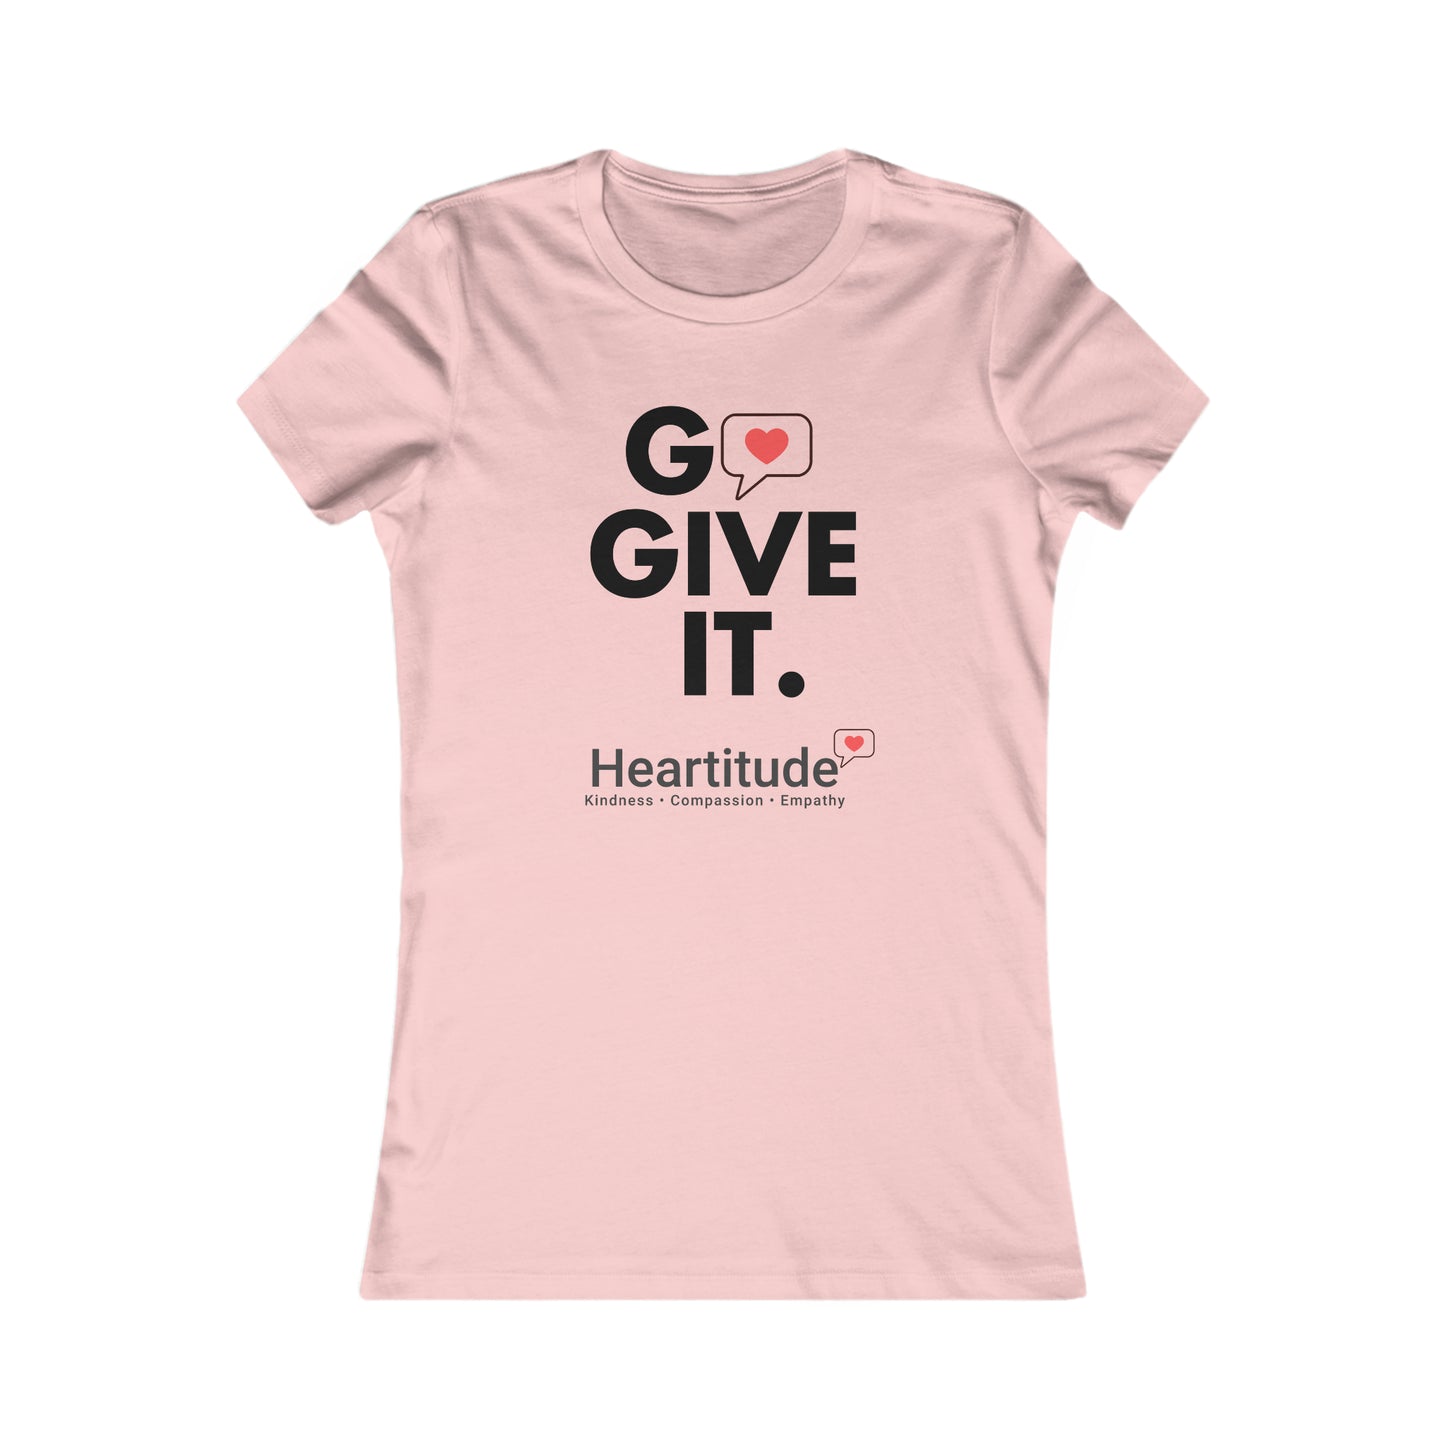 Go Give It Women's Short Sleeve Shirt (50% to charity)